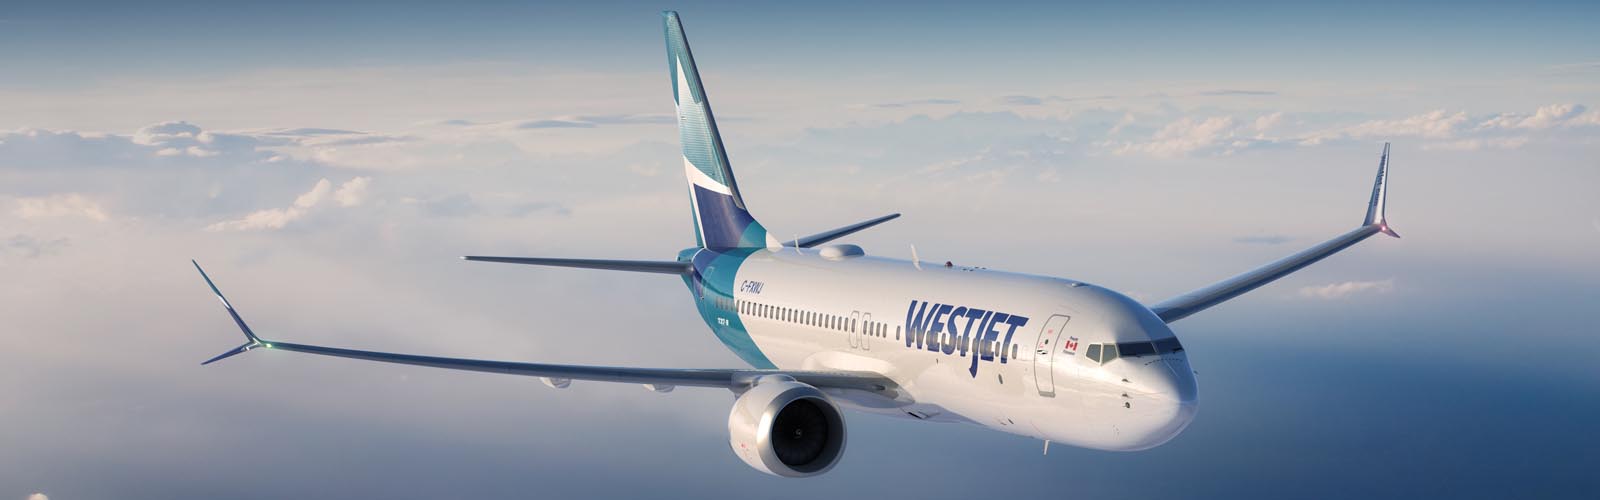 WestJet Boeing MAX 8 aircraft flying over clouds